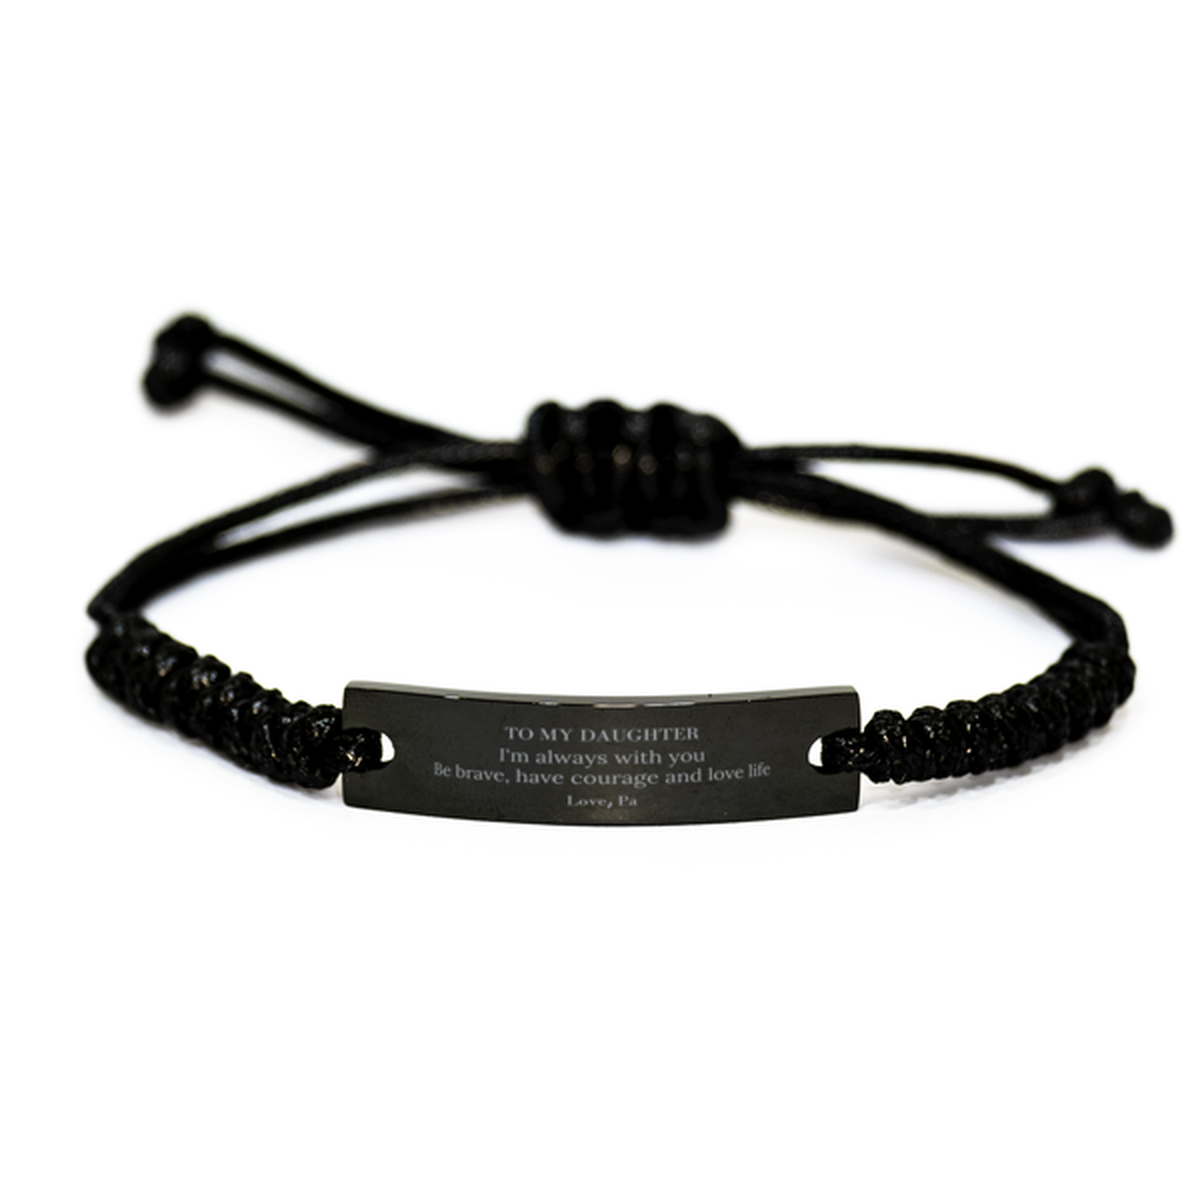 To My Daughter Gifts from Pa, Unique Black Rope Bracelet Inspirational Christmas Birthday Graduation Gifts for Daughter I'm always with you. Be brave, have courage and love life. Love, Pa